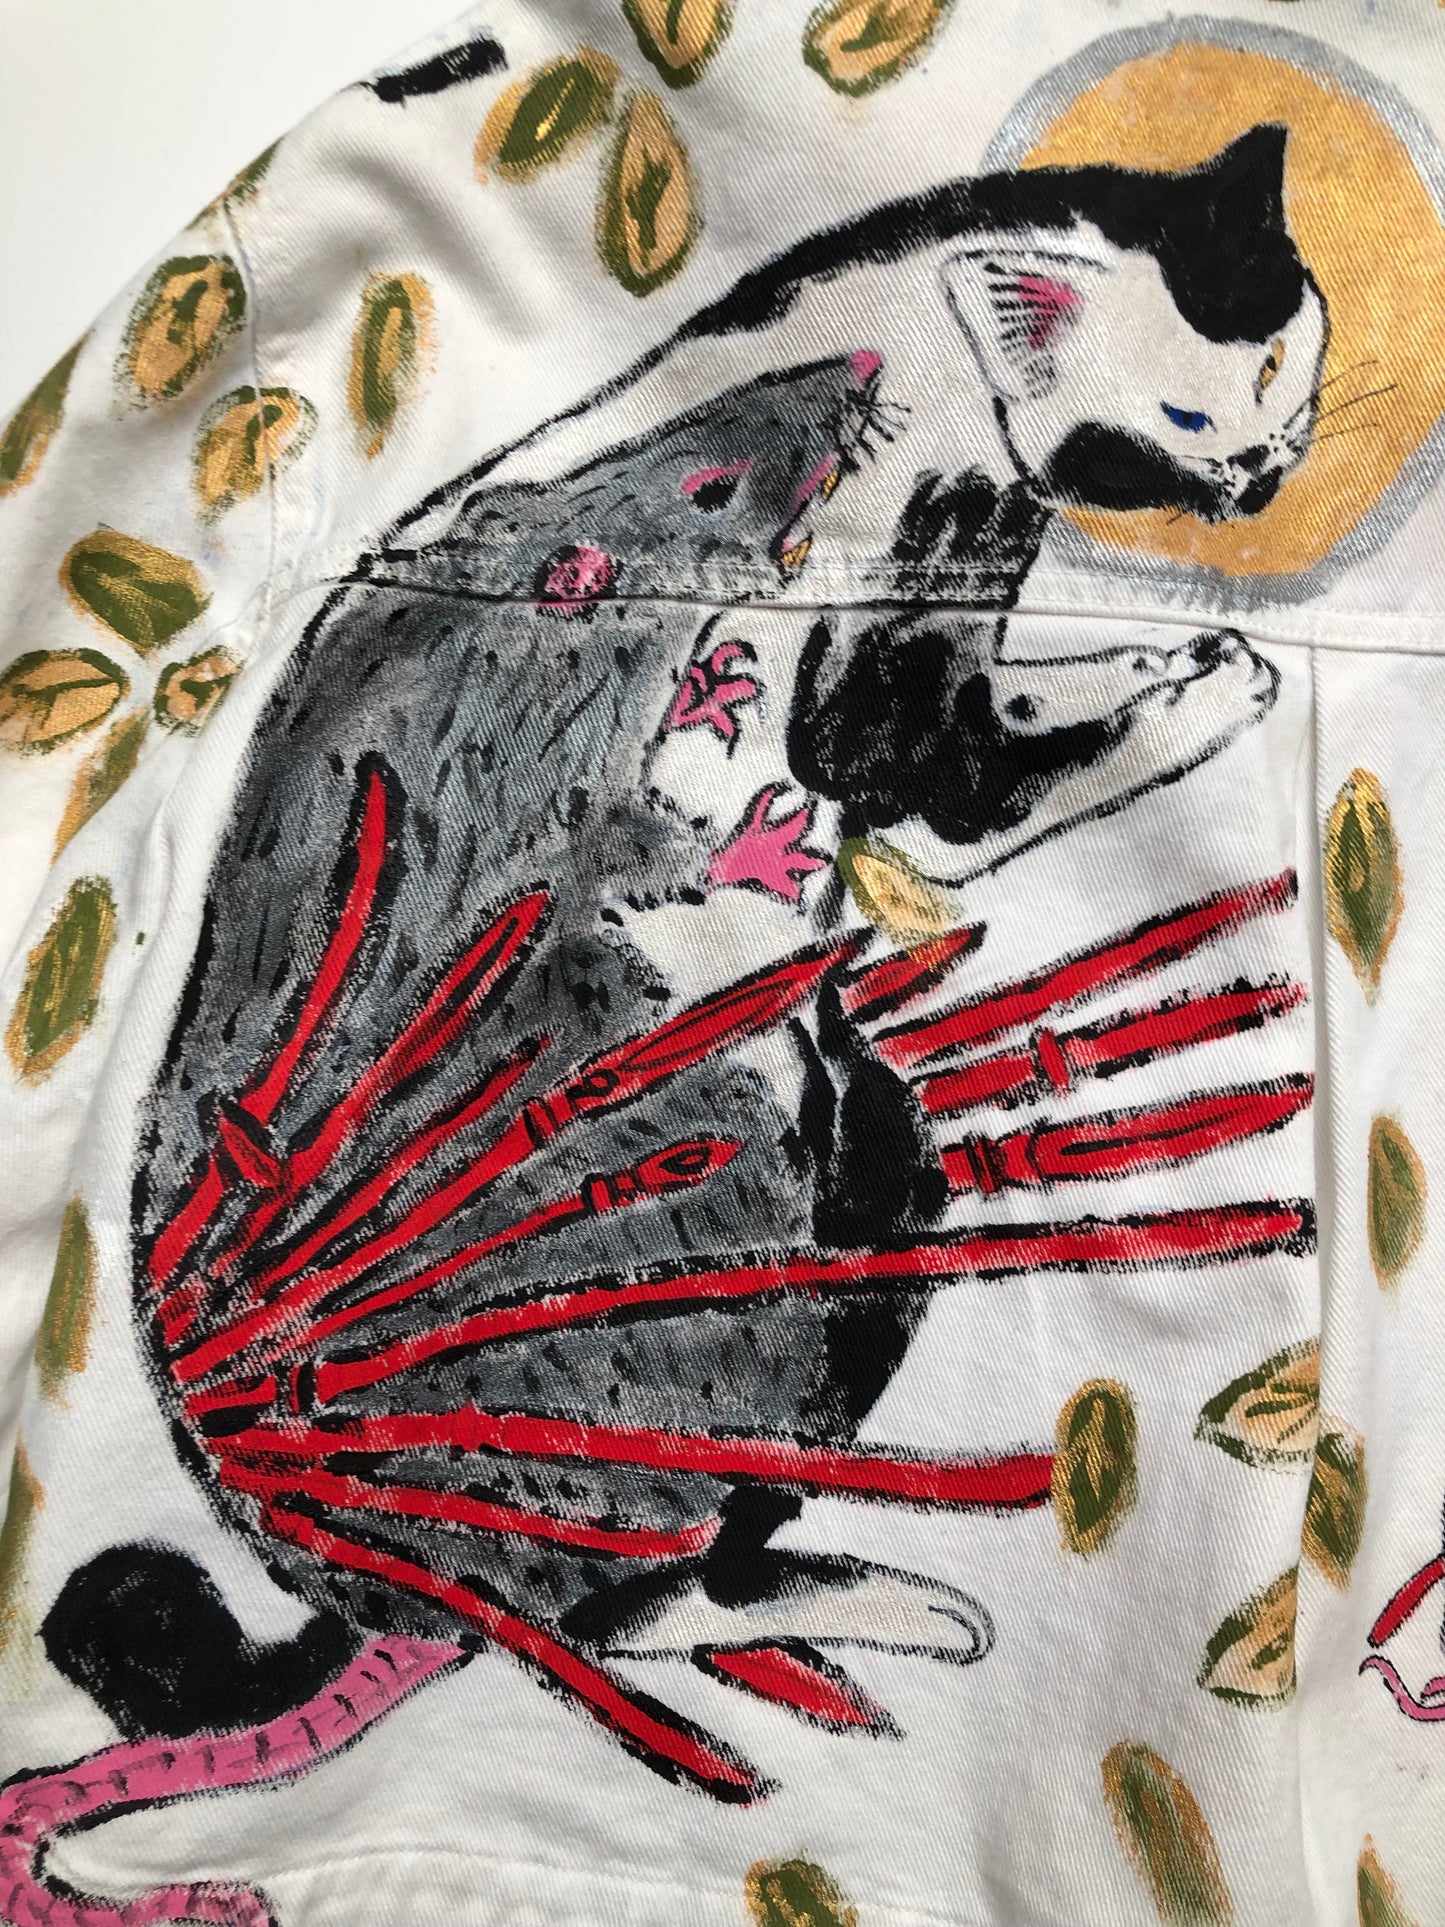 Praying cat with a rat in detail on a women's denim jacket